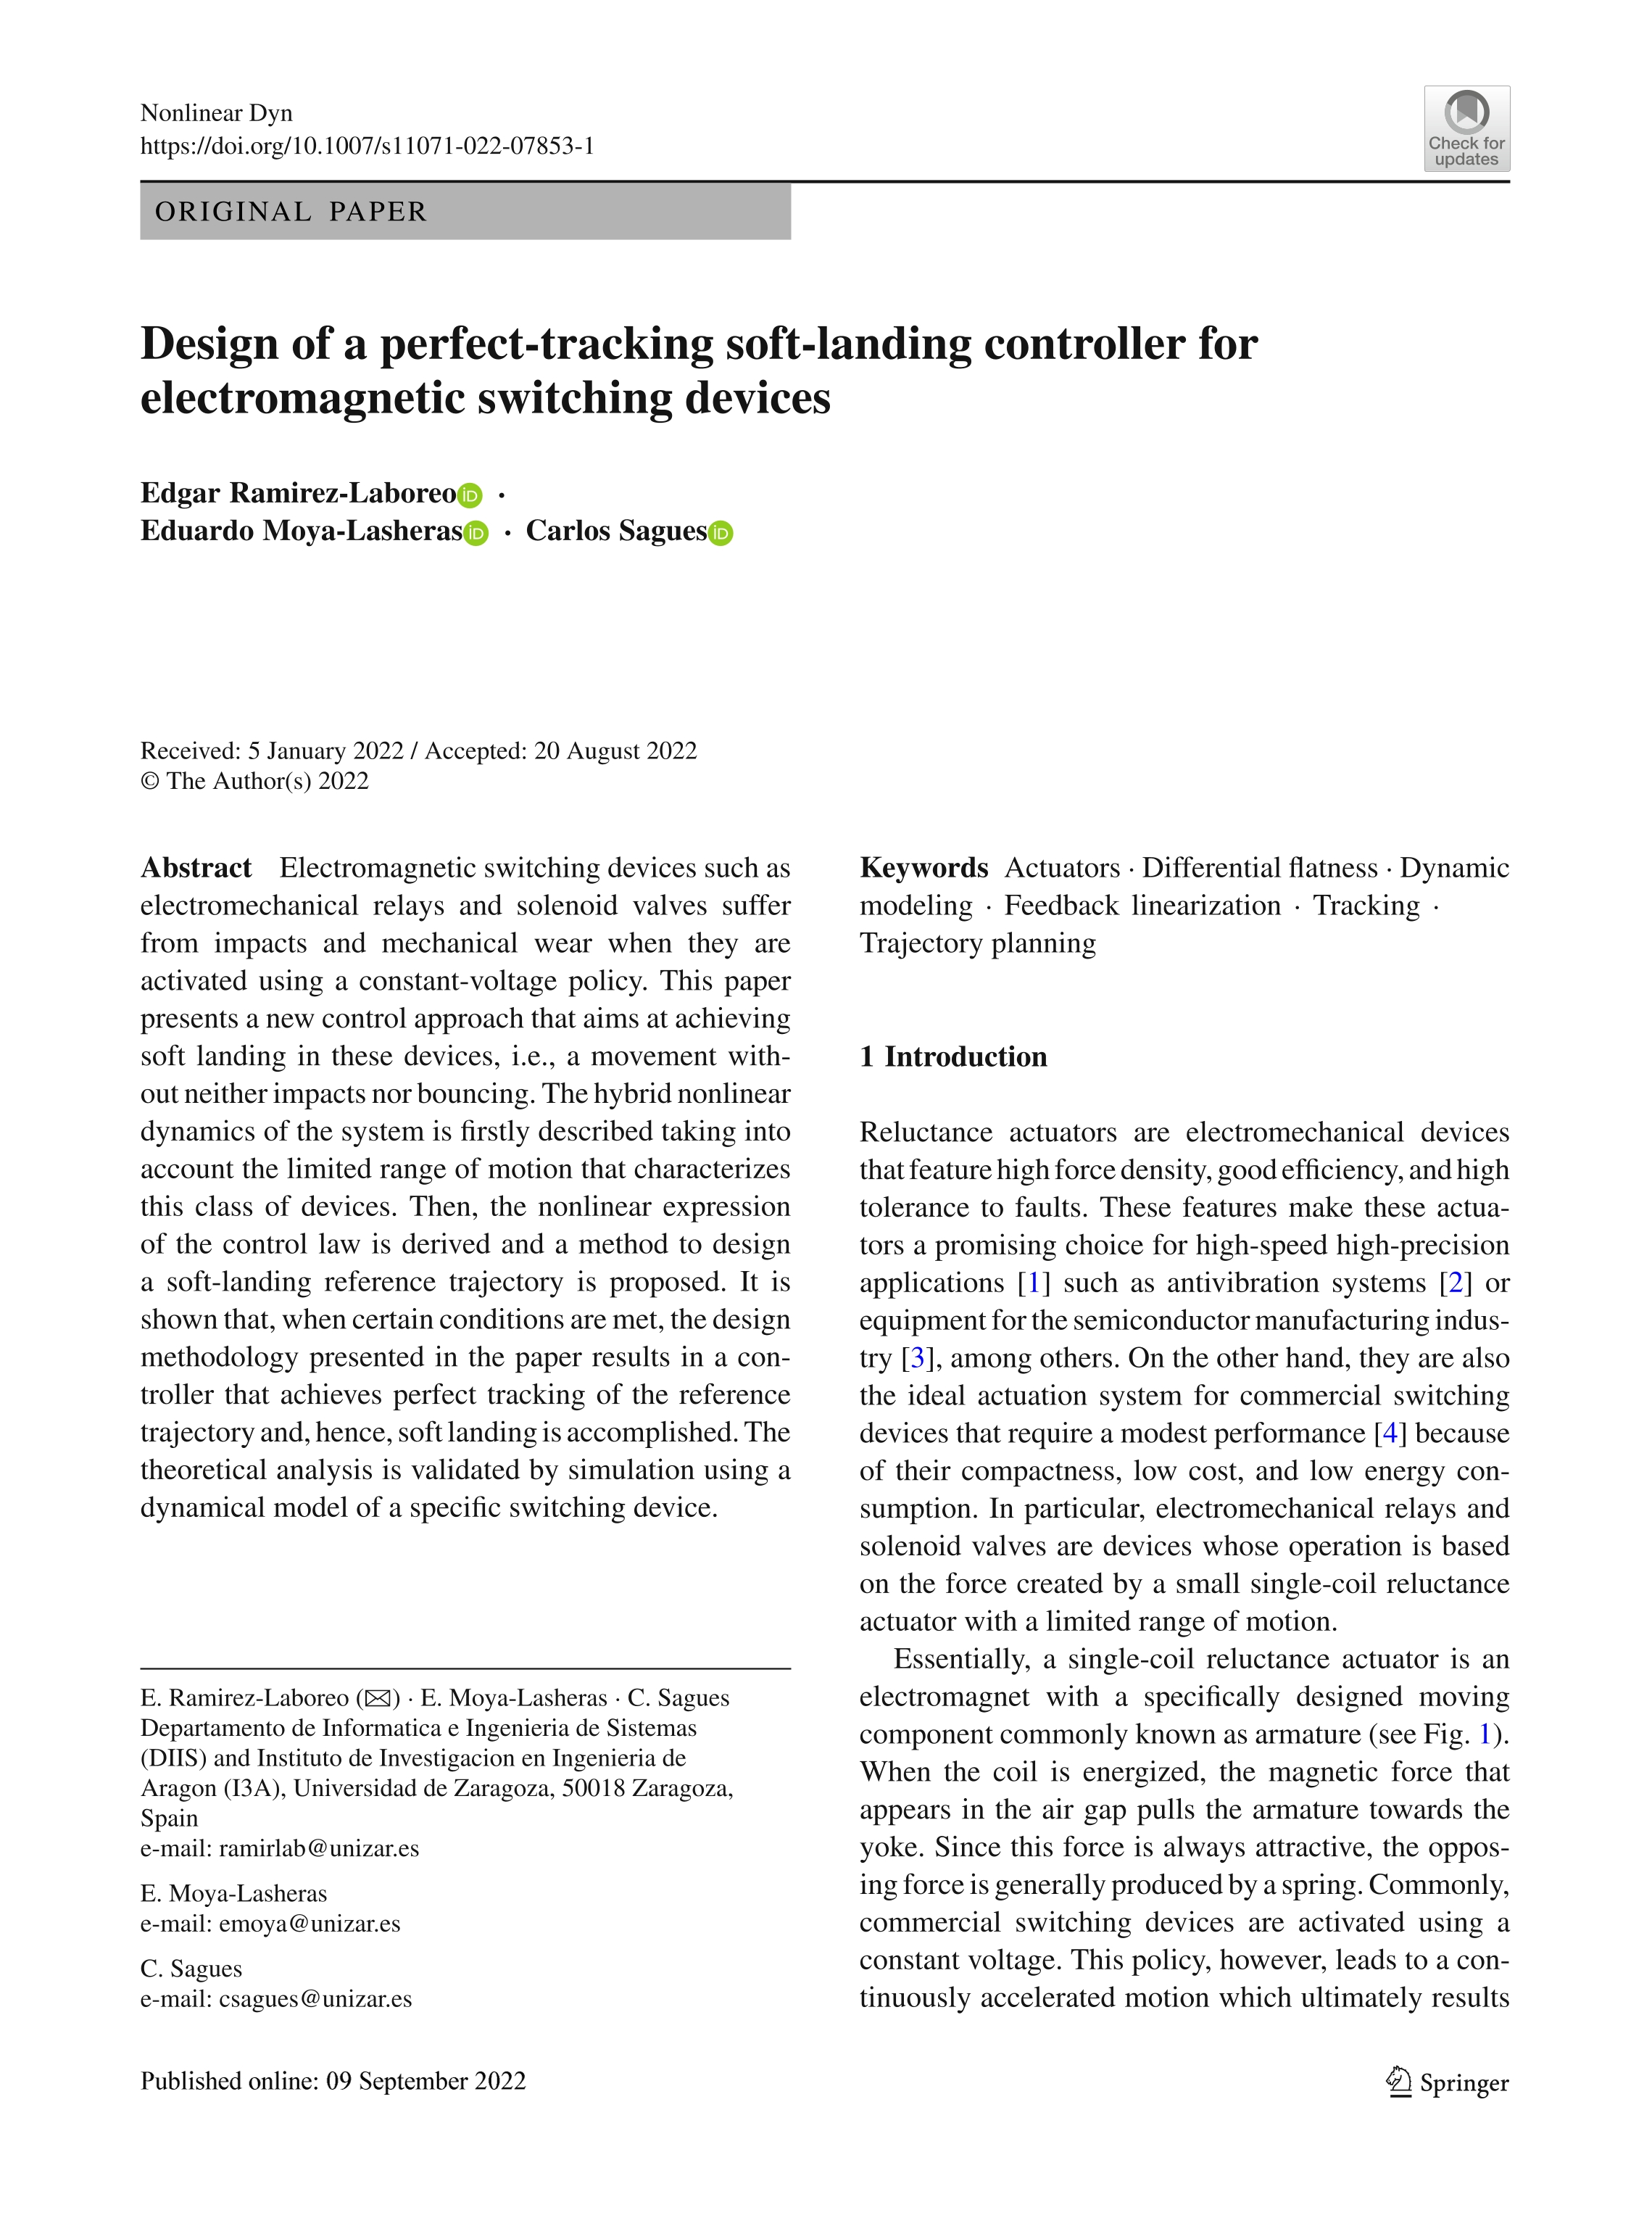 Design of a perfect-tracking soft-landing controller for electromagnetic switching devices